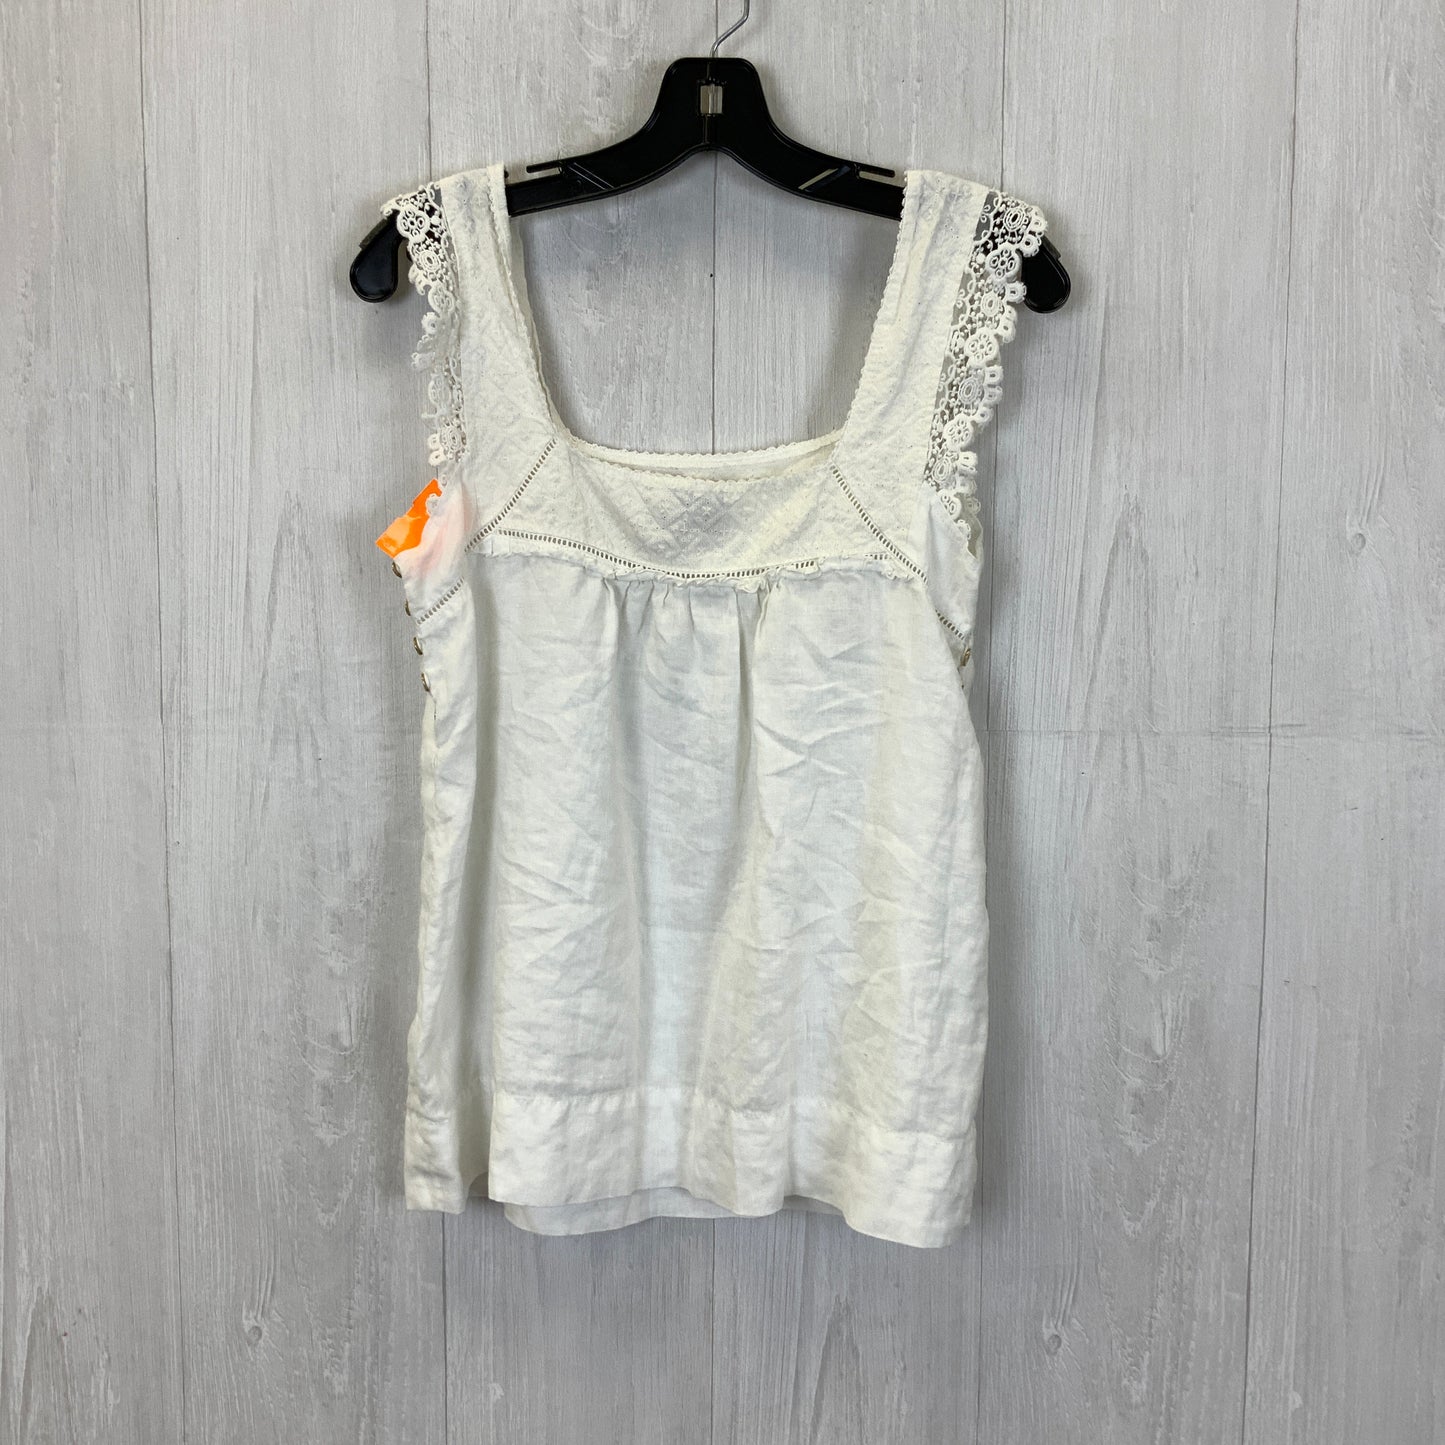 Top Sleeveless By Juicy Couture  Size: S